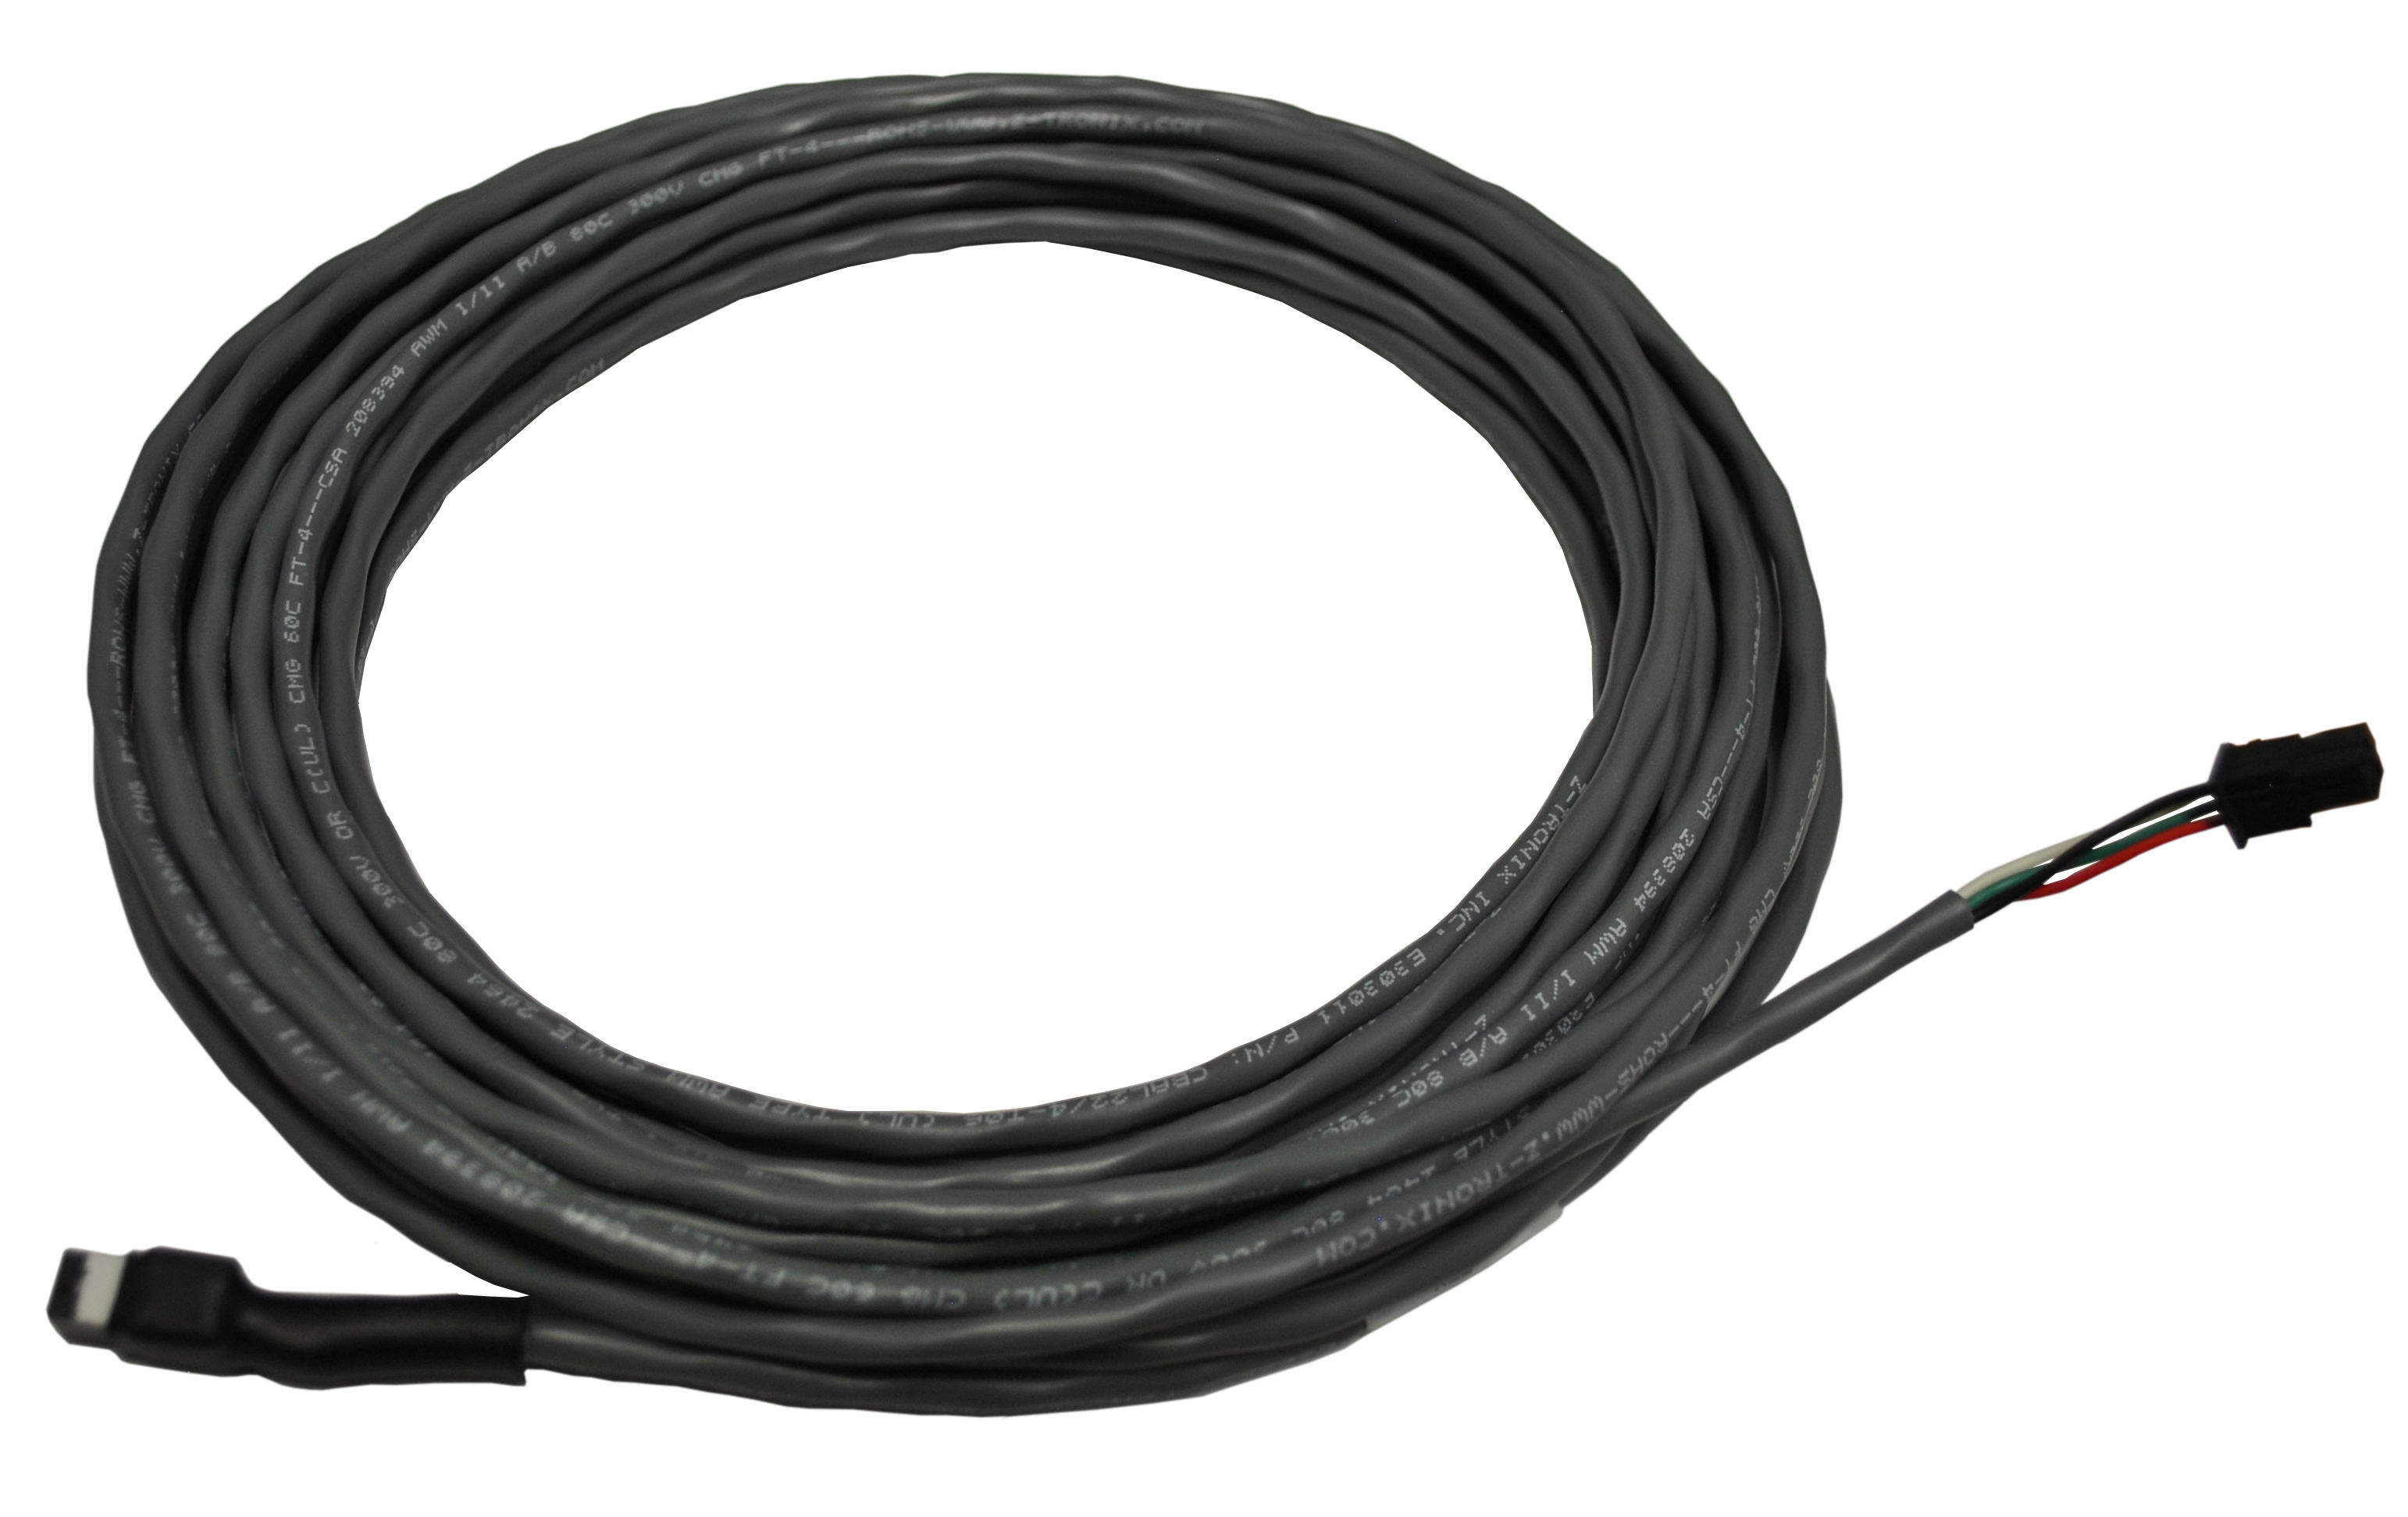 Balboa 25' BP extension cable for TP Controllers